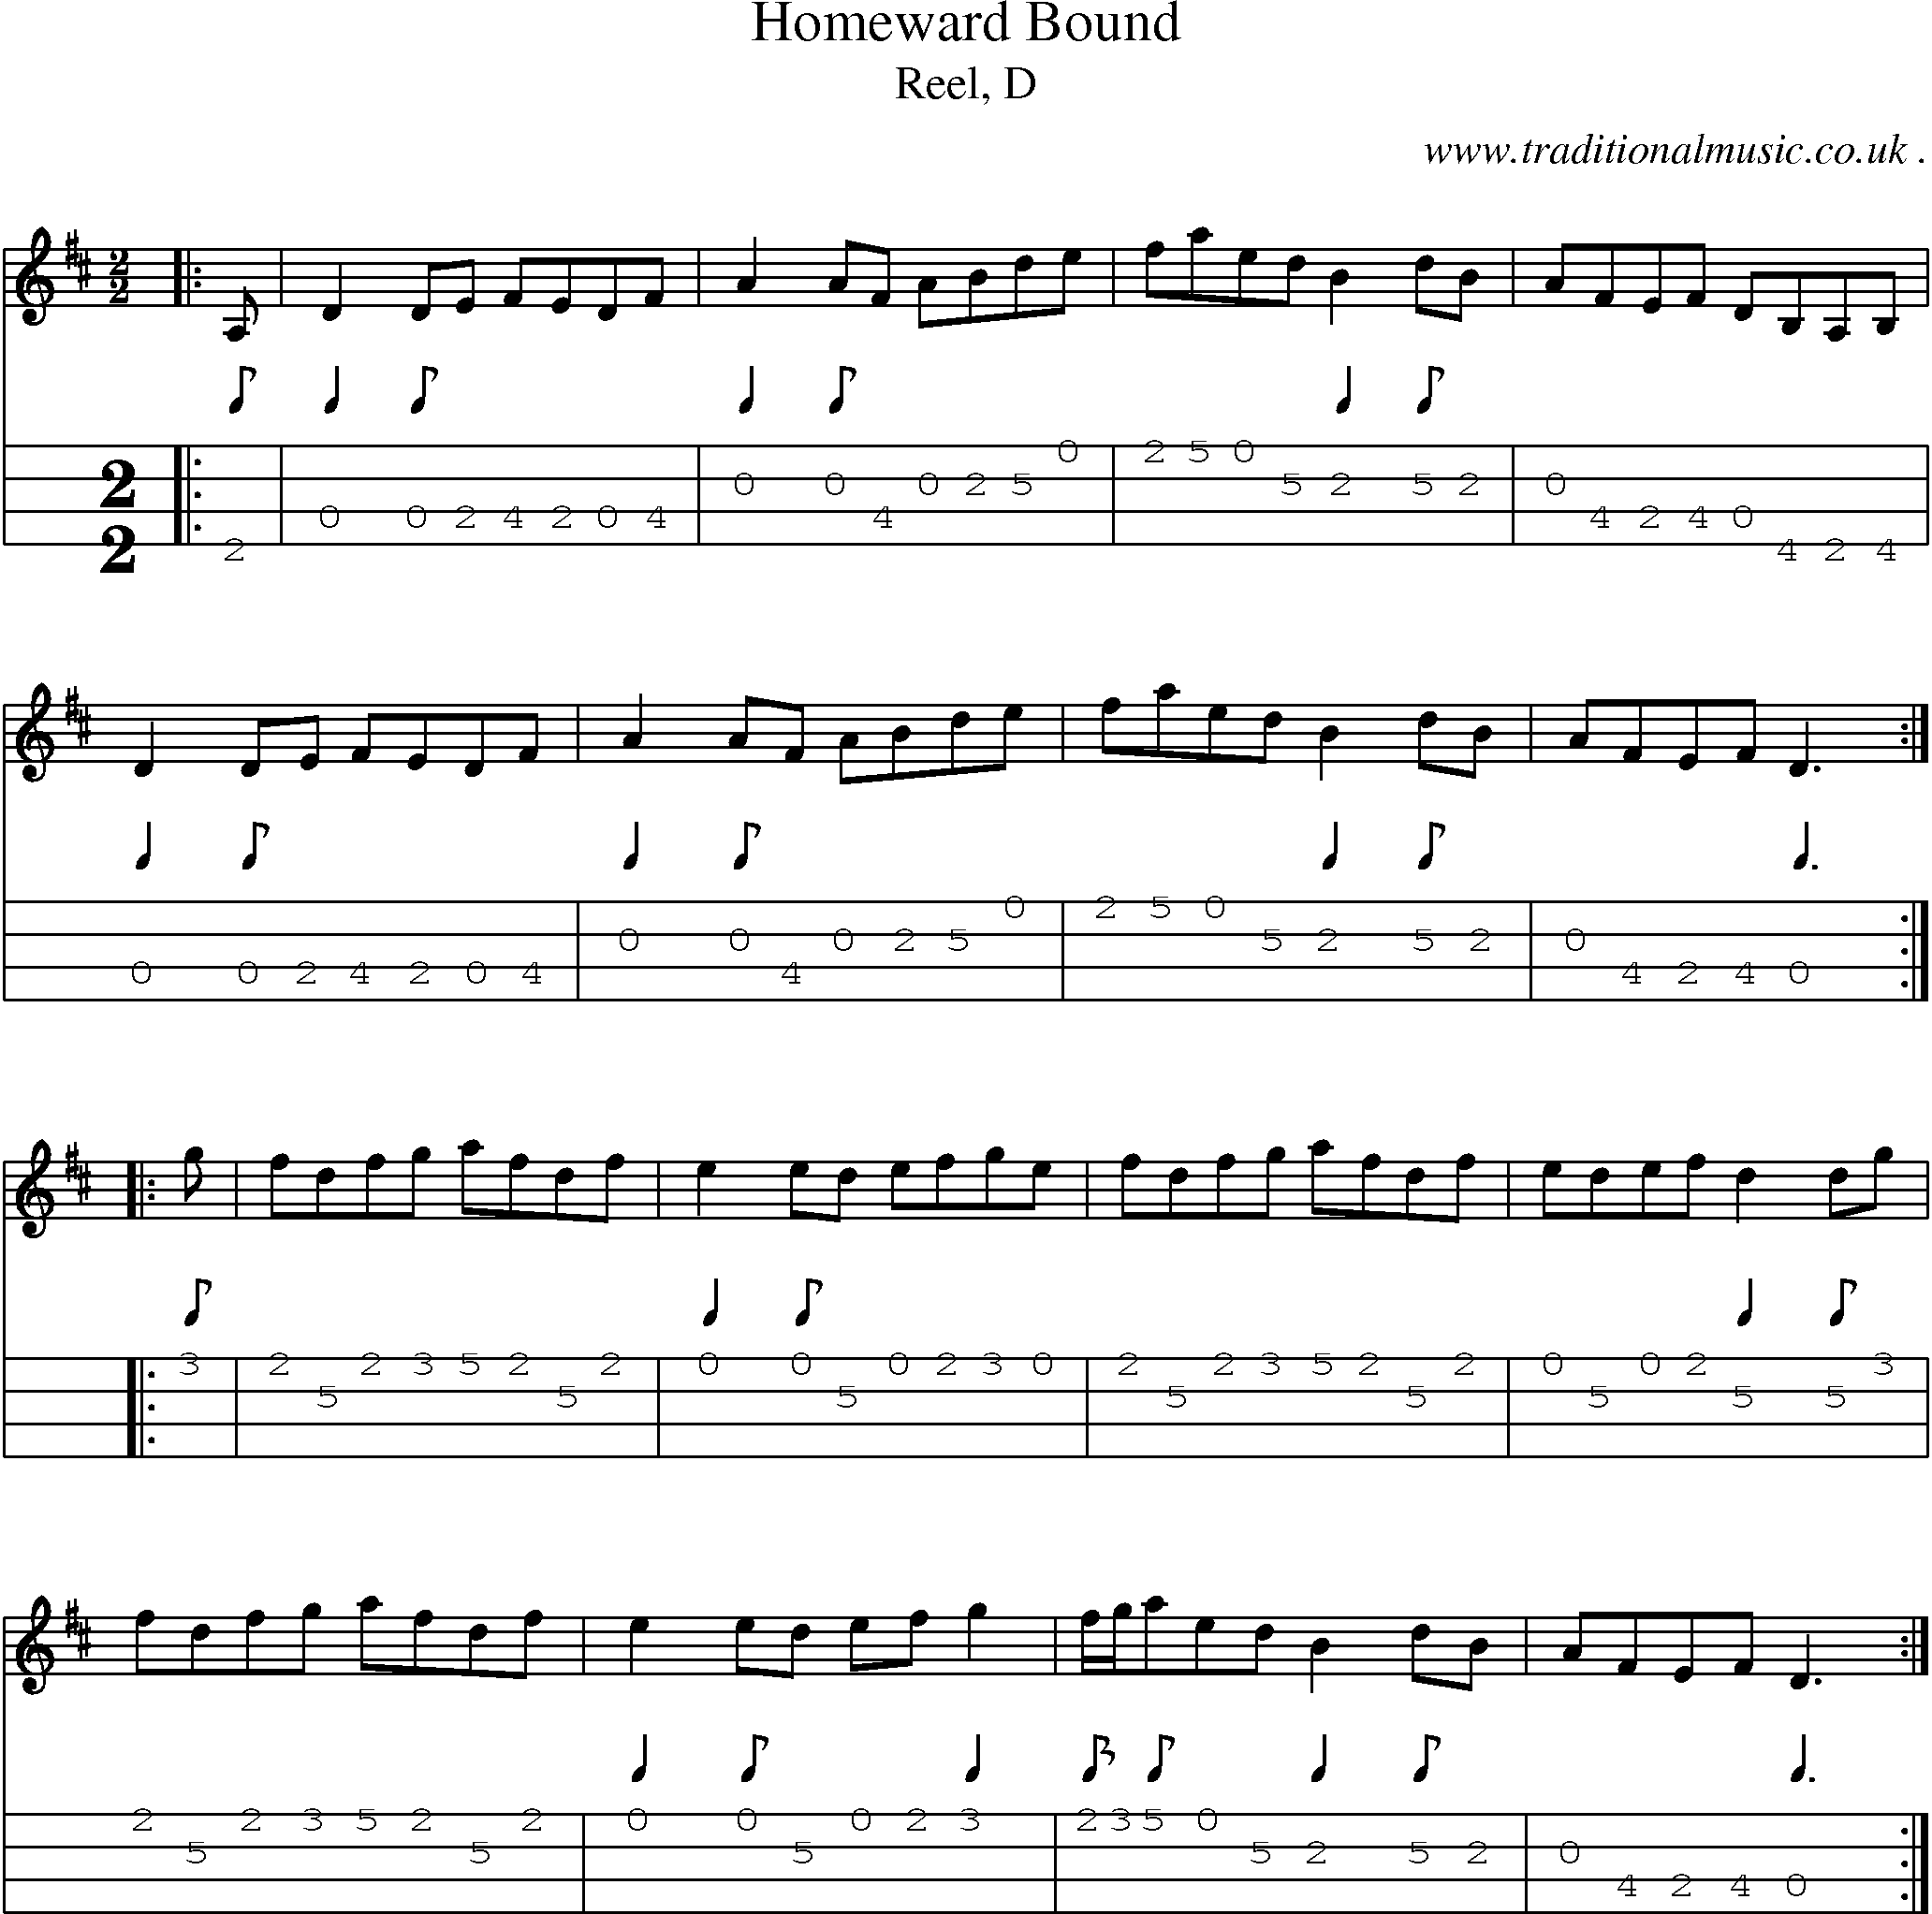 Sheet-music  score, Chords and Mandolin Tabs for Homeward Bound